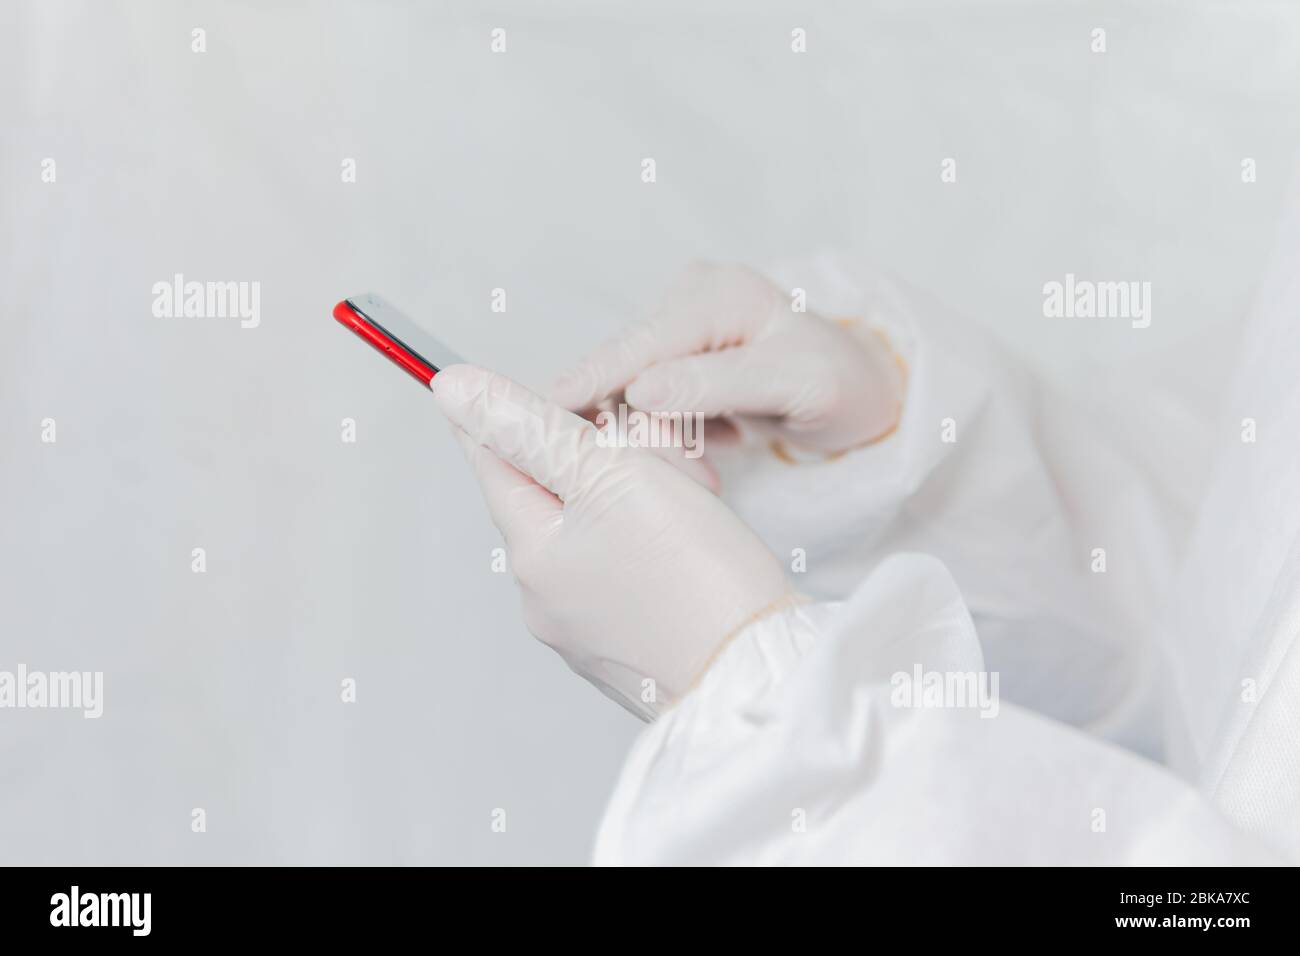 Nurse or doctor using technology phone to communicate and research information wearing protective biohazard suit and gloves during covid 19 pandemic Stock Photo